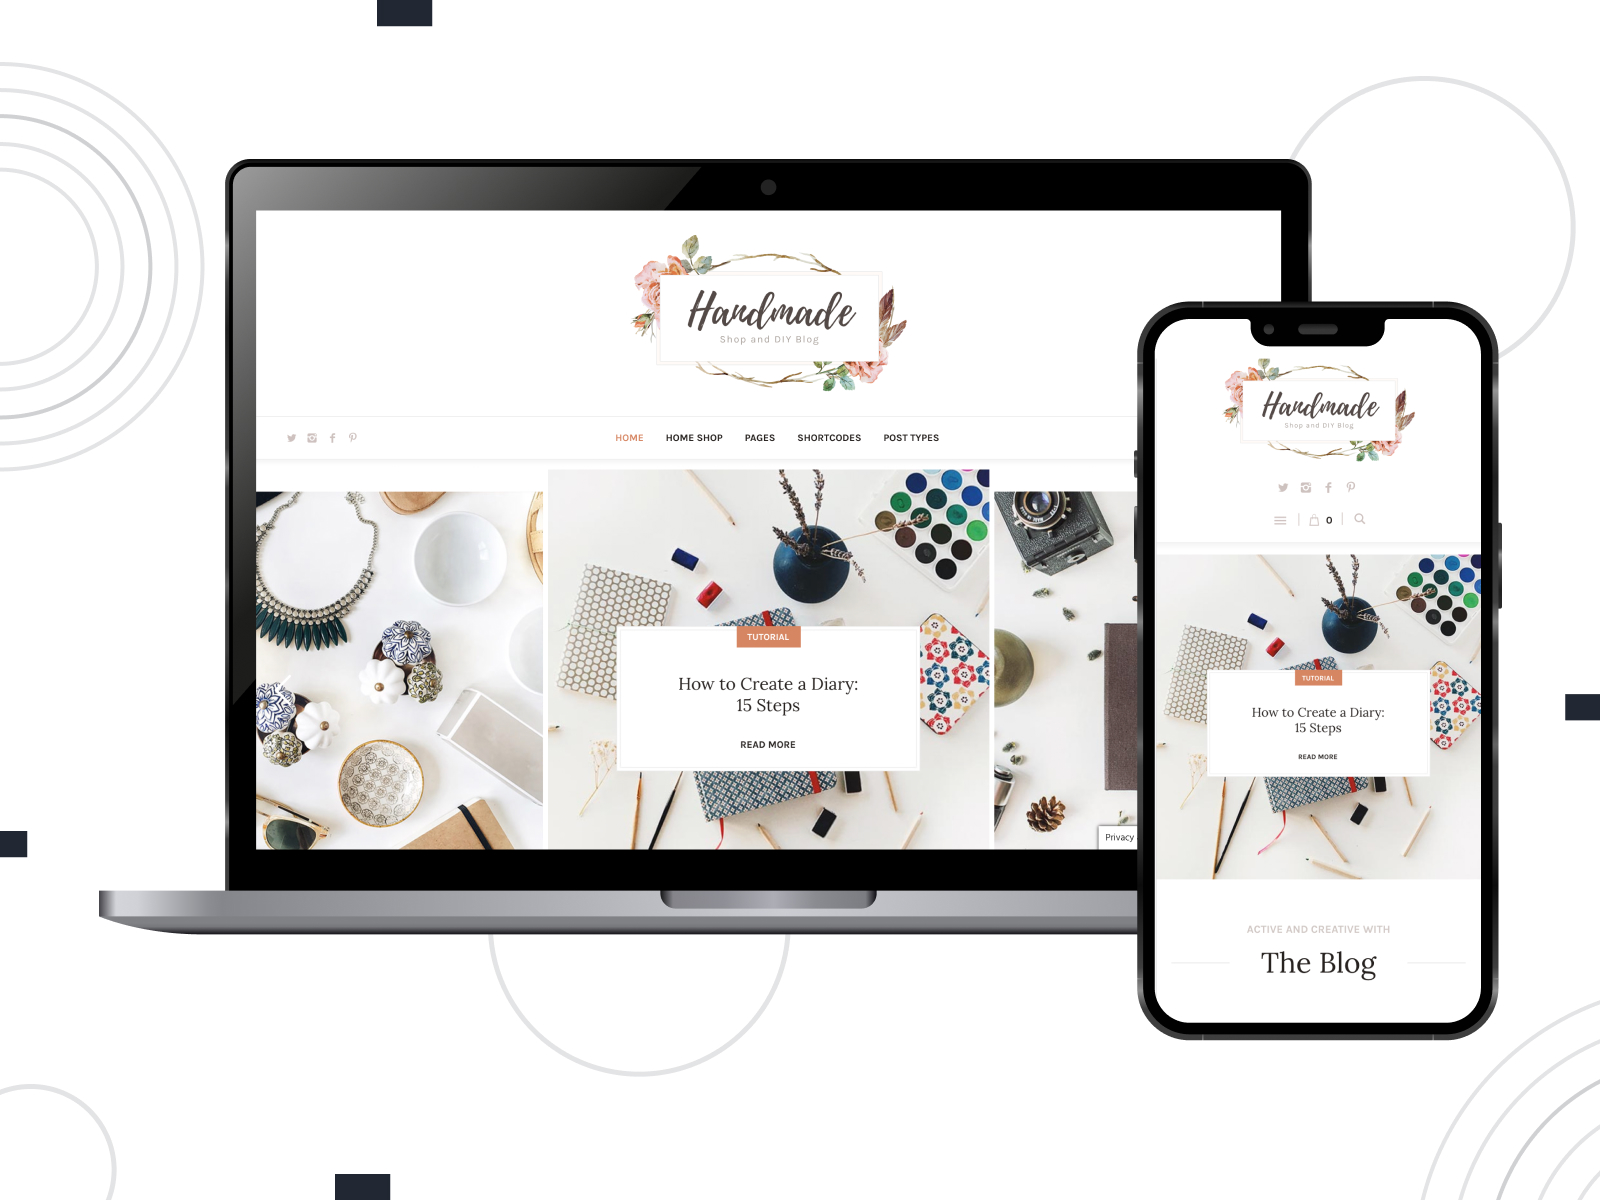 View of Handmade Shop, an adaptable WordPress theme for handmade stores with custom widgets in black, white, and darksalmon color configuration.